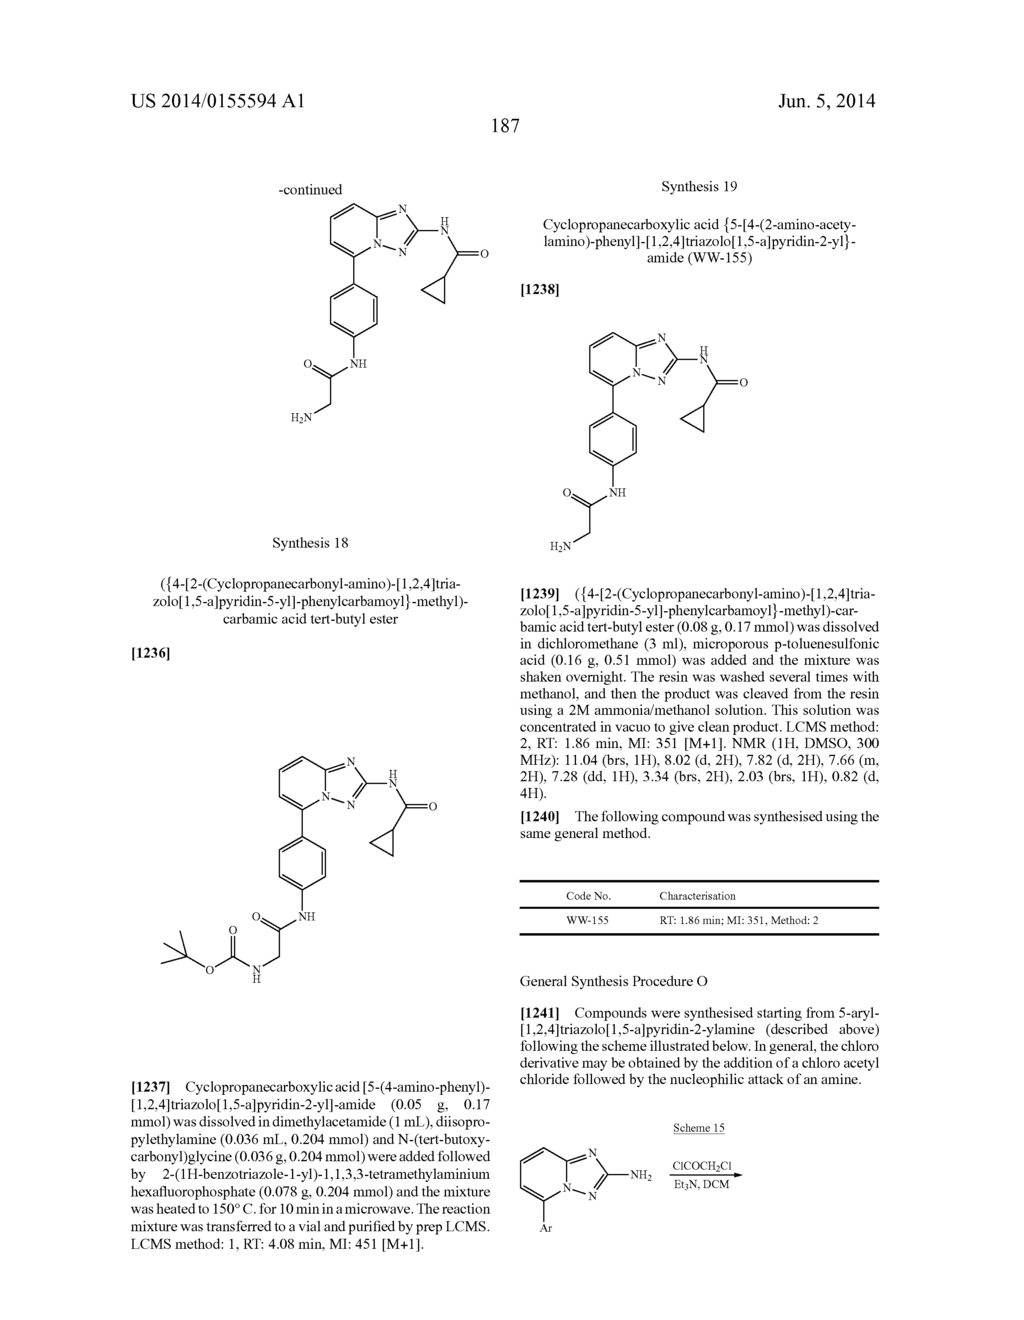 [1,2,4]Triazolo[1,5-a]Pyridine and [1,2,4]Triazolo[1,5-c]Pyrimidine     Compounds and Their Use - diagram, schematic, and image 188